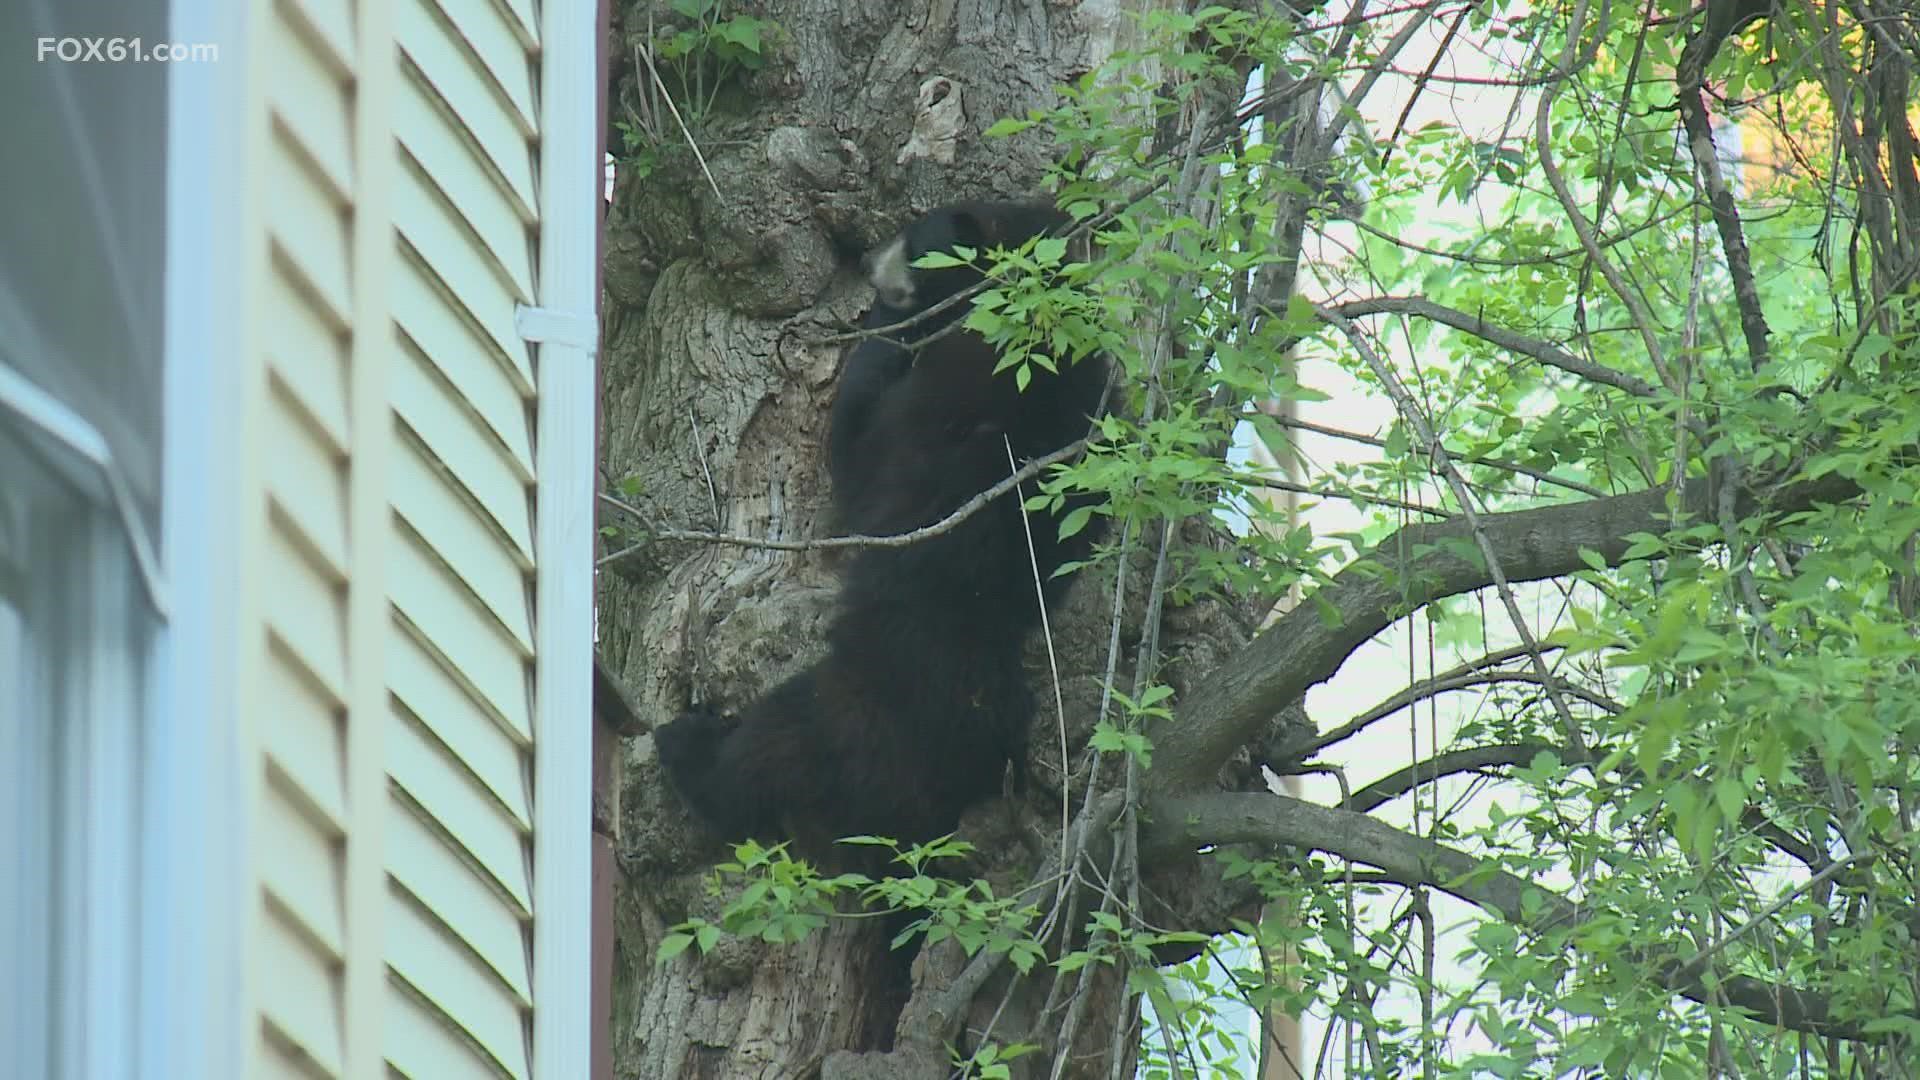 Neighbors said it was the first time they'd seen a bear in the area